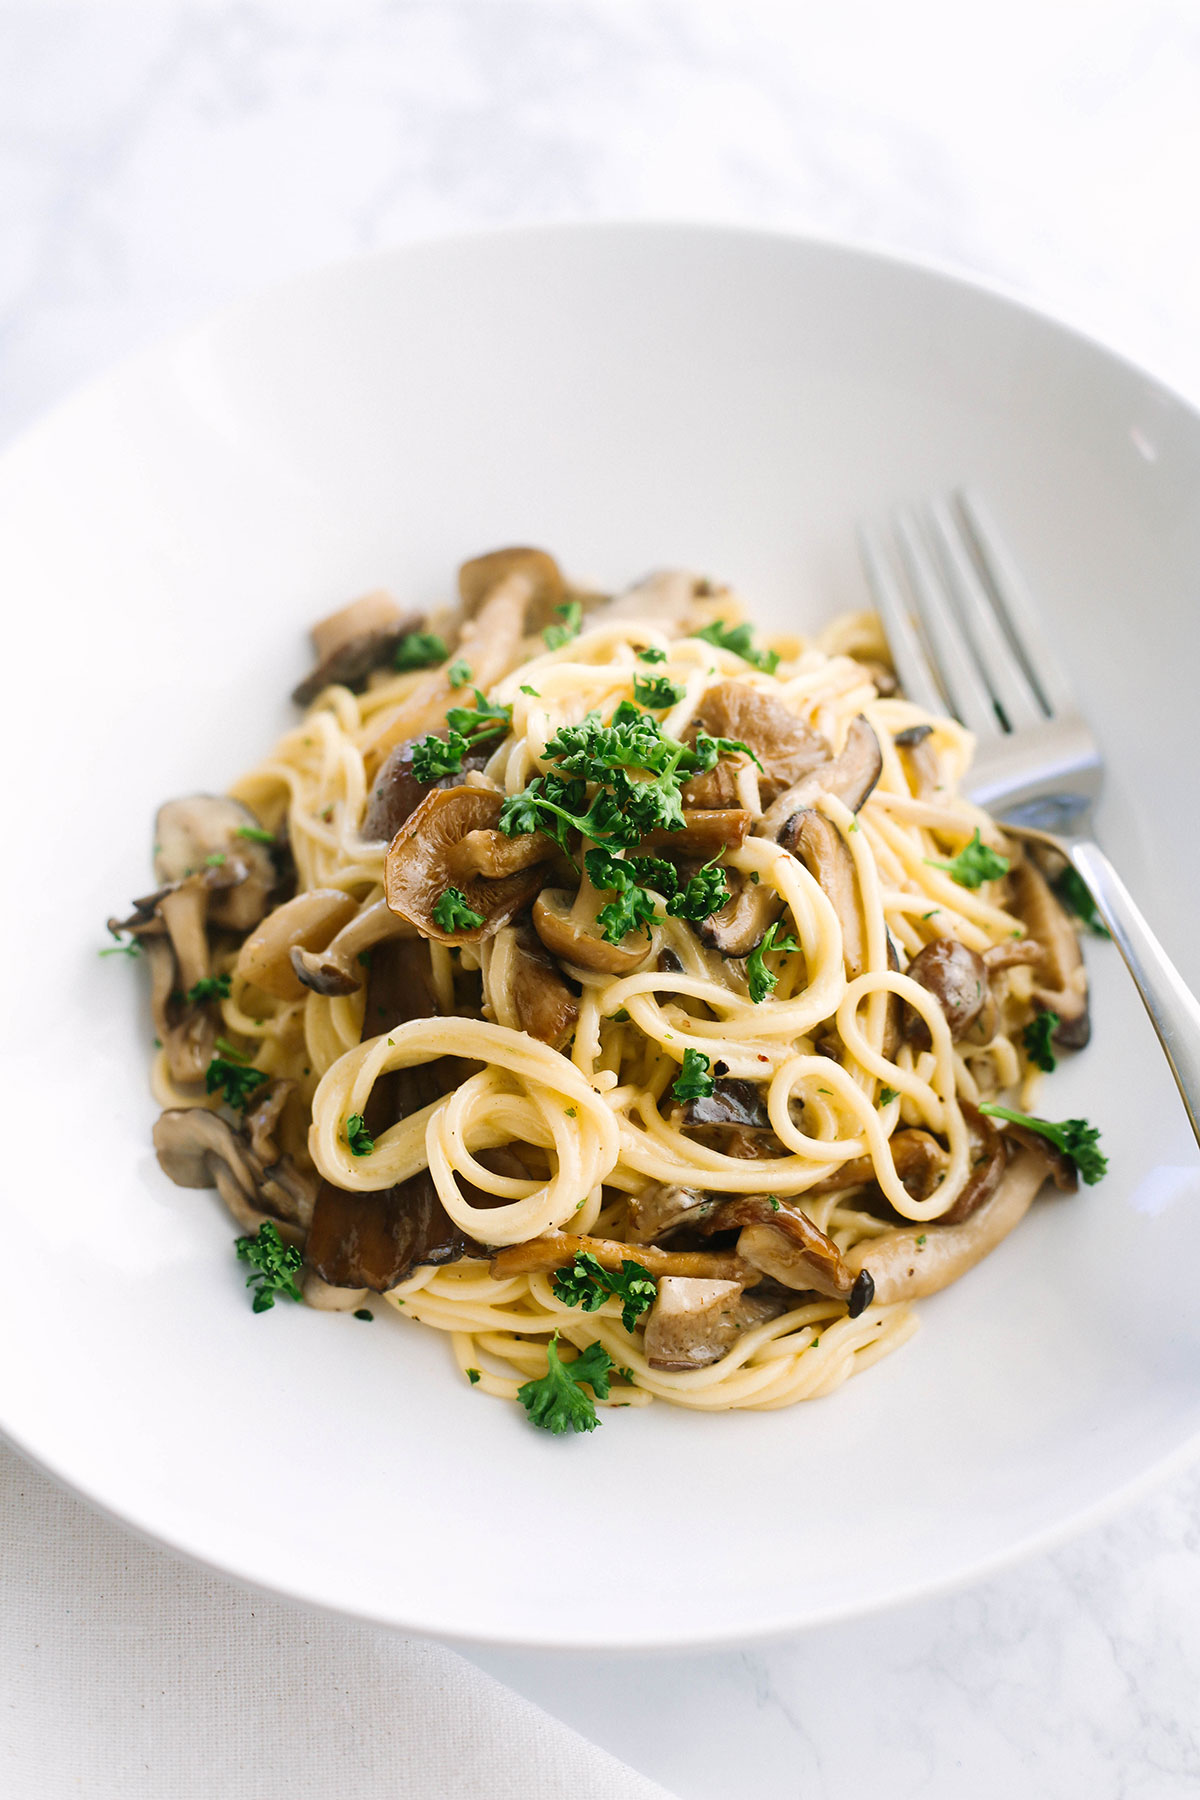 Mushroom pasta for keto and low carb. Easy recipe with shirataki noodles.